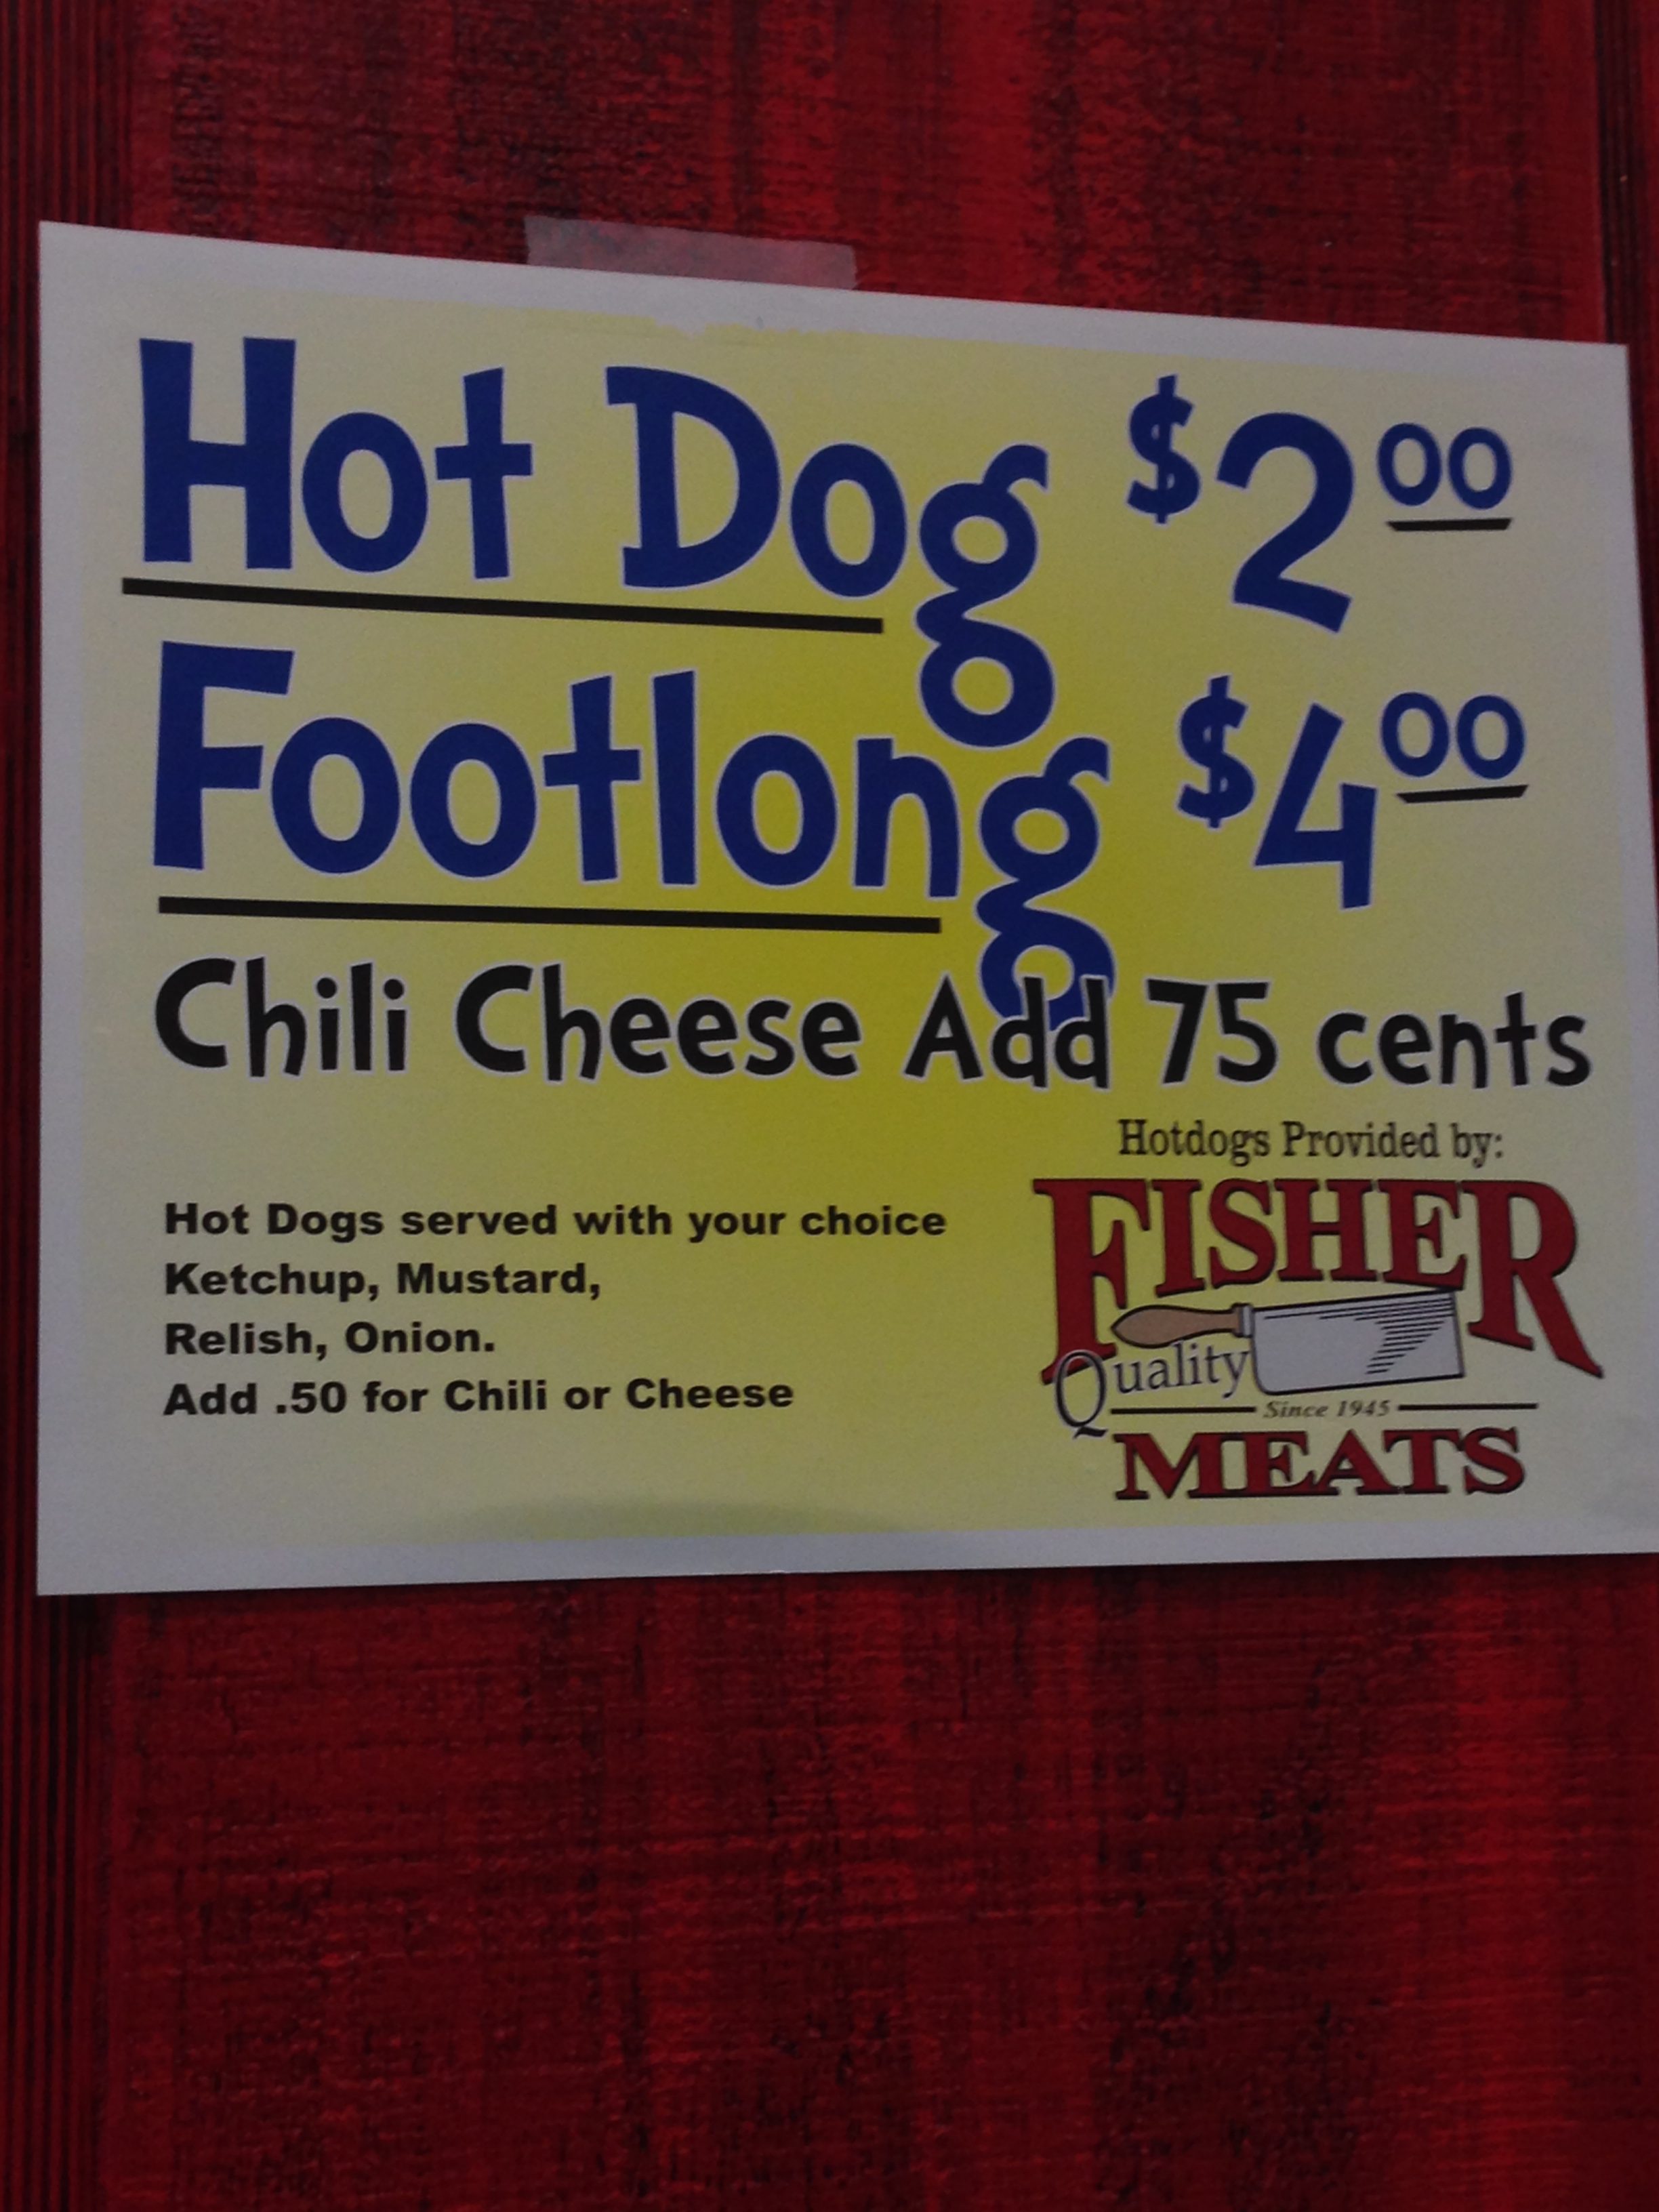 They serve Hot Dogs from Fisher Meats